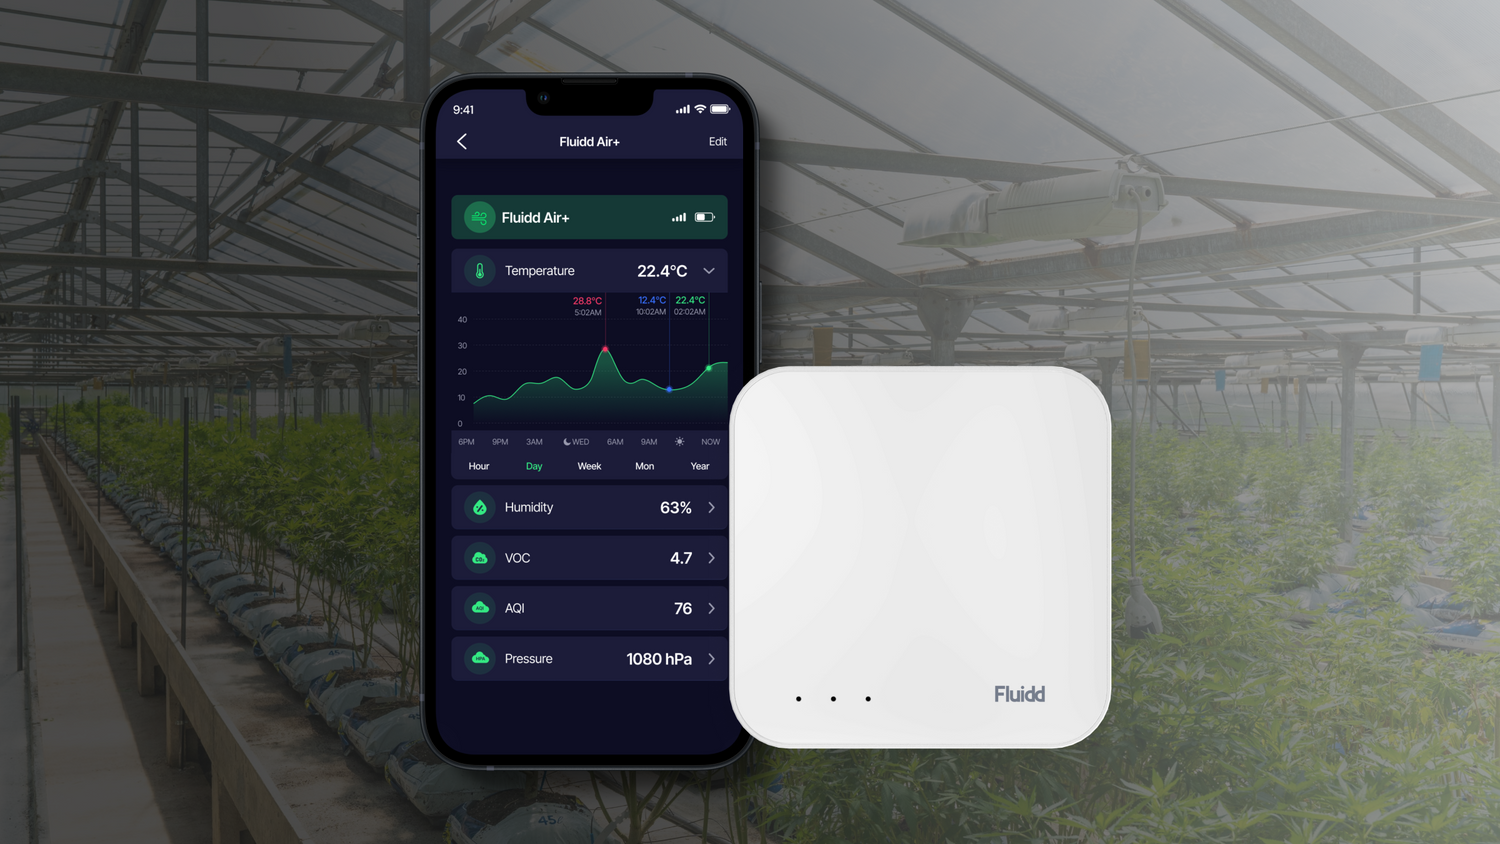 Fluidd is a leading provider of smart devices and sensors designed specifically for indoor growers